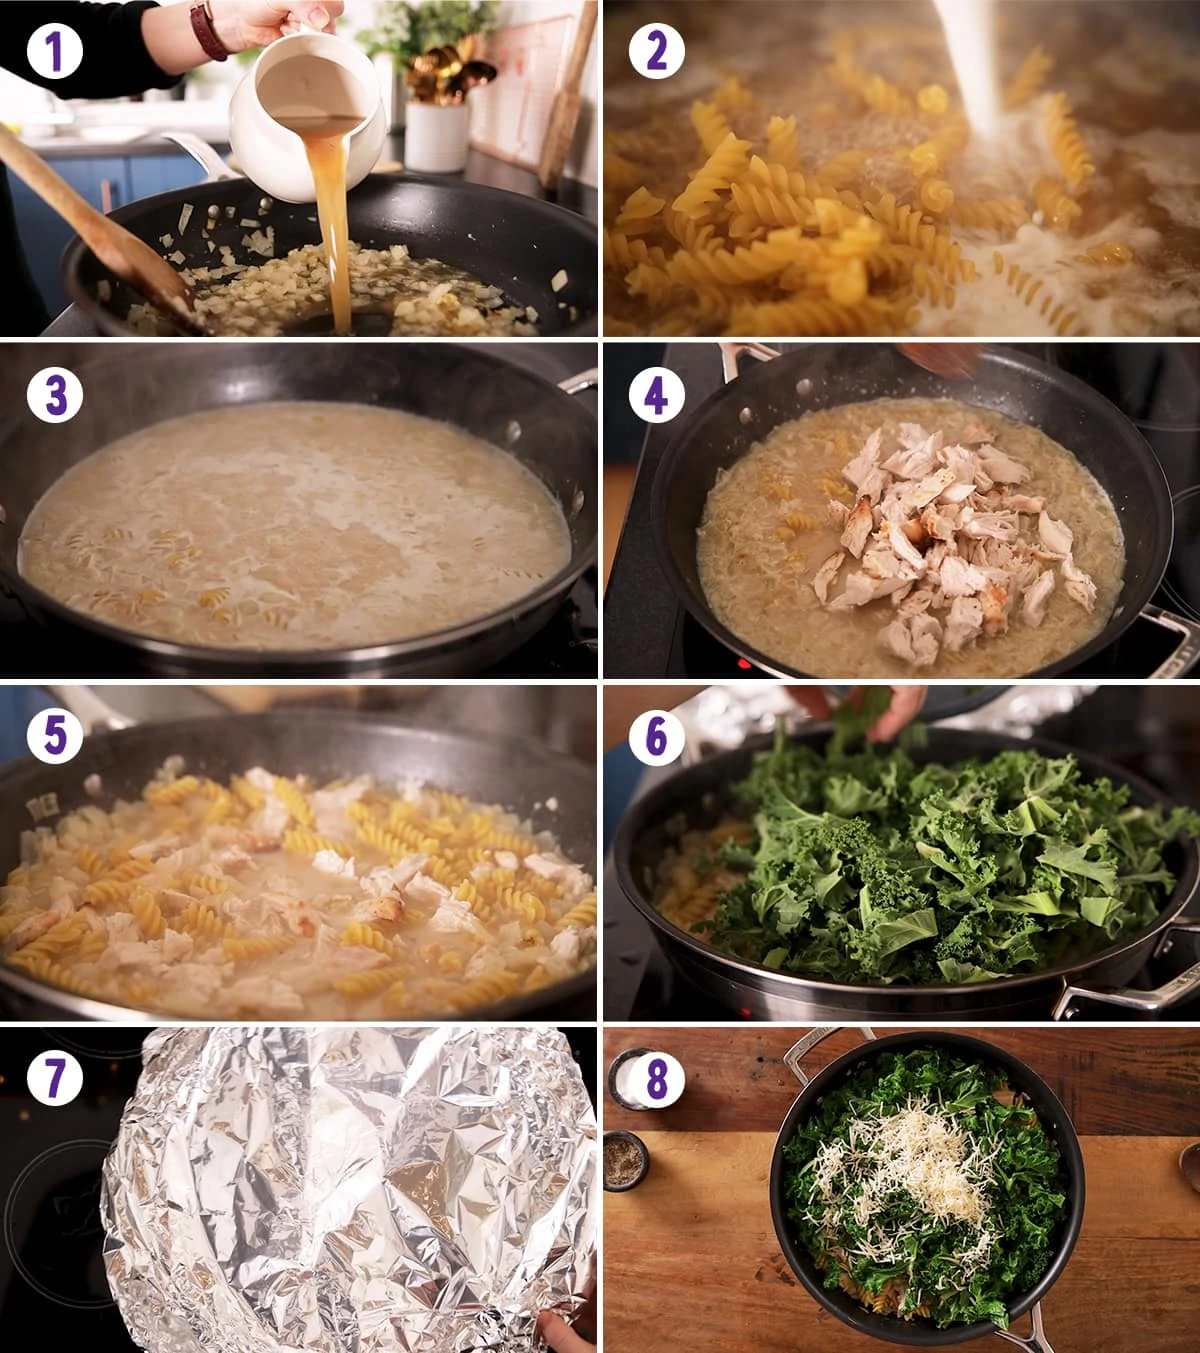 8 images in a collage showing the process of making a chicken pasta recipe.